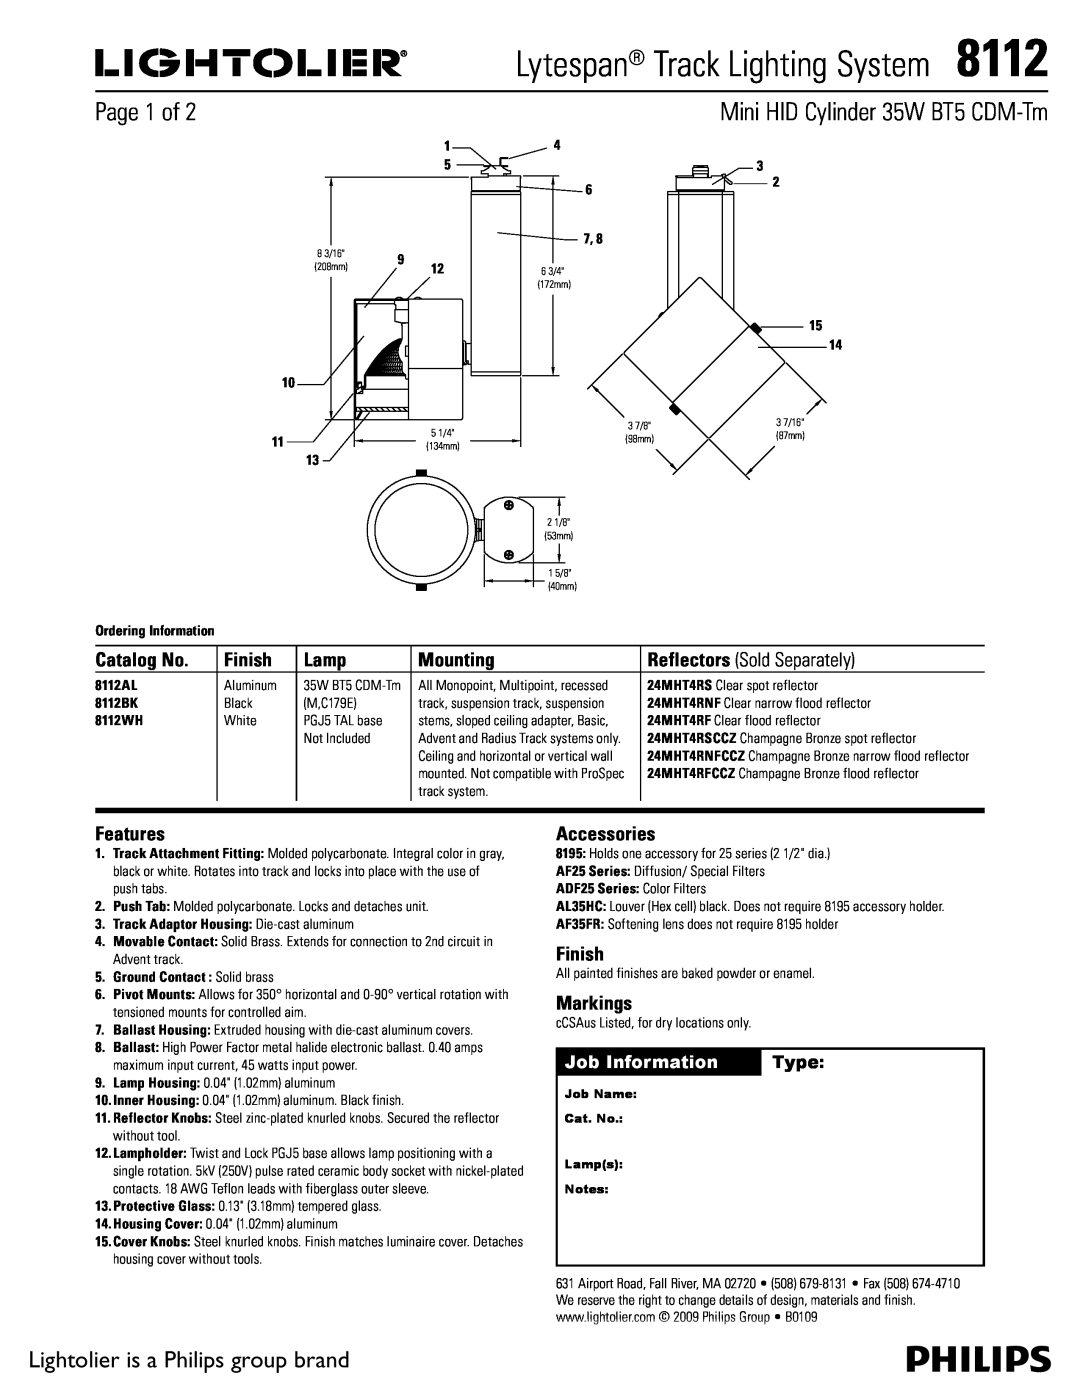 Lightolier 8112 manual Page 1 of, Lightolier is a Philips group brand, Catalog No, Finish, Lamp, Mounting, Features, Type 